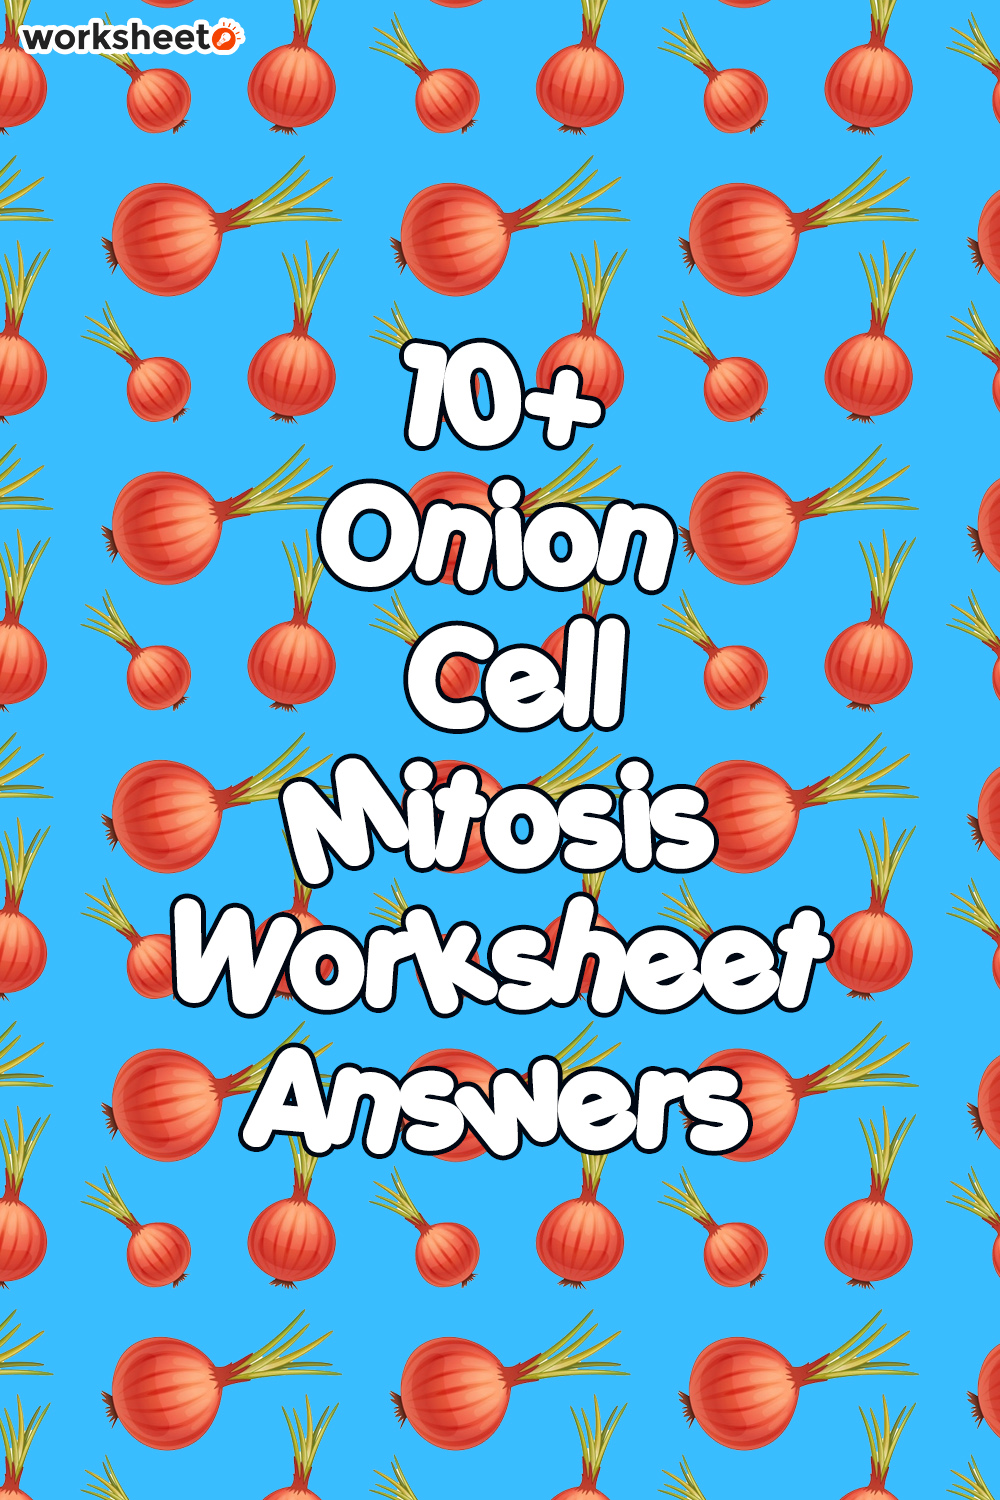 15 Images of Onion Cell Mitosis Worksheet Answers